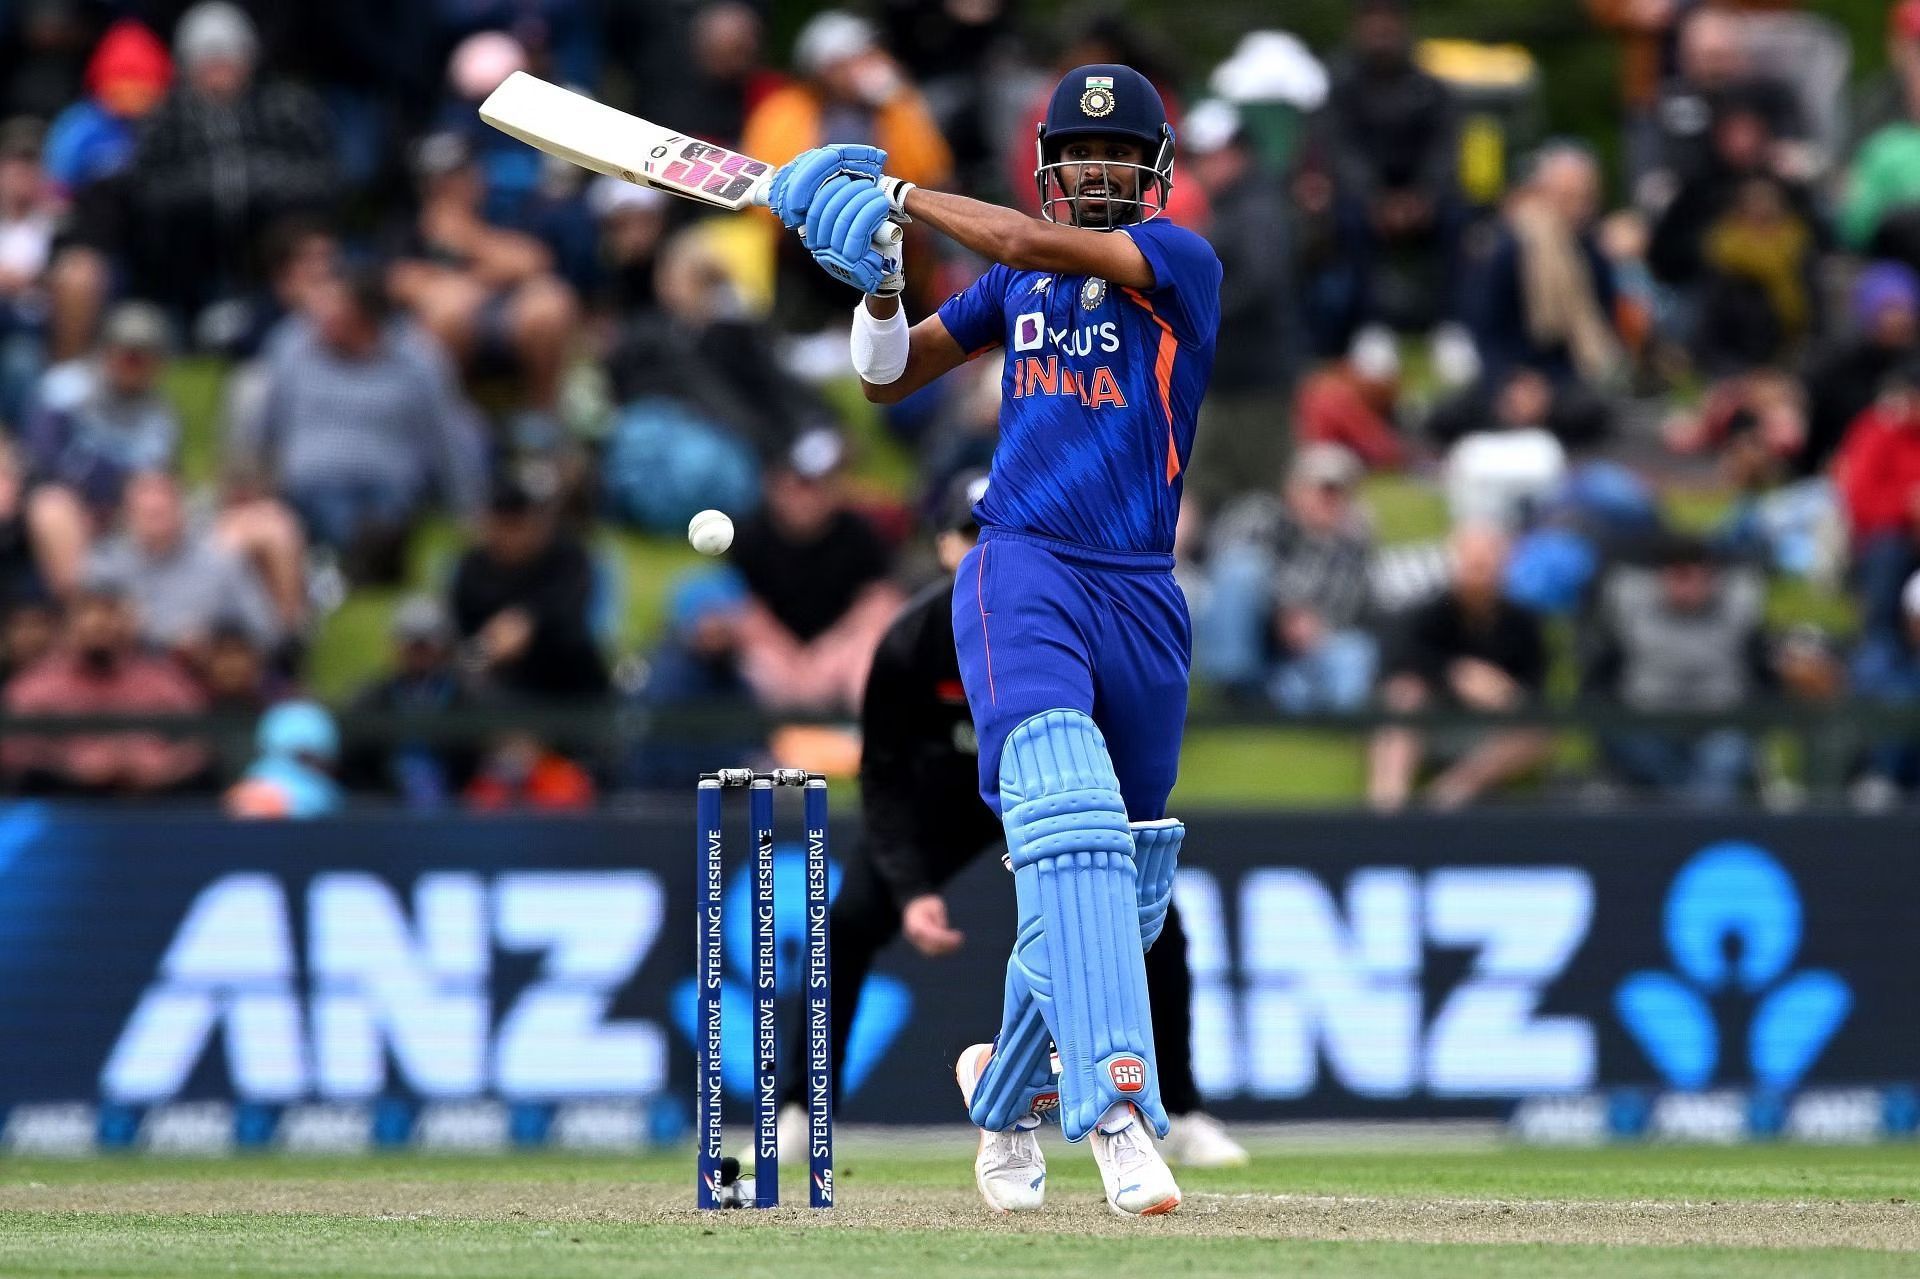 Washington Sundar replaced Axar Patel in the Indian team for the Asia Cup final. (Pic: Getty Images)